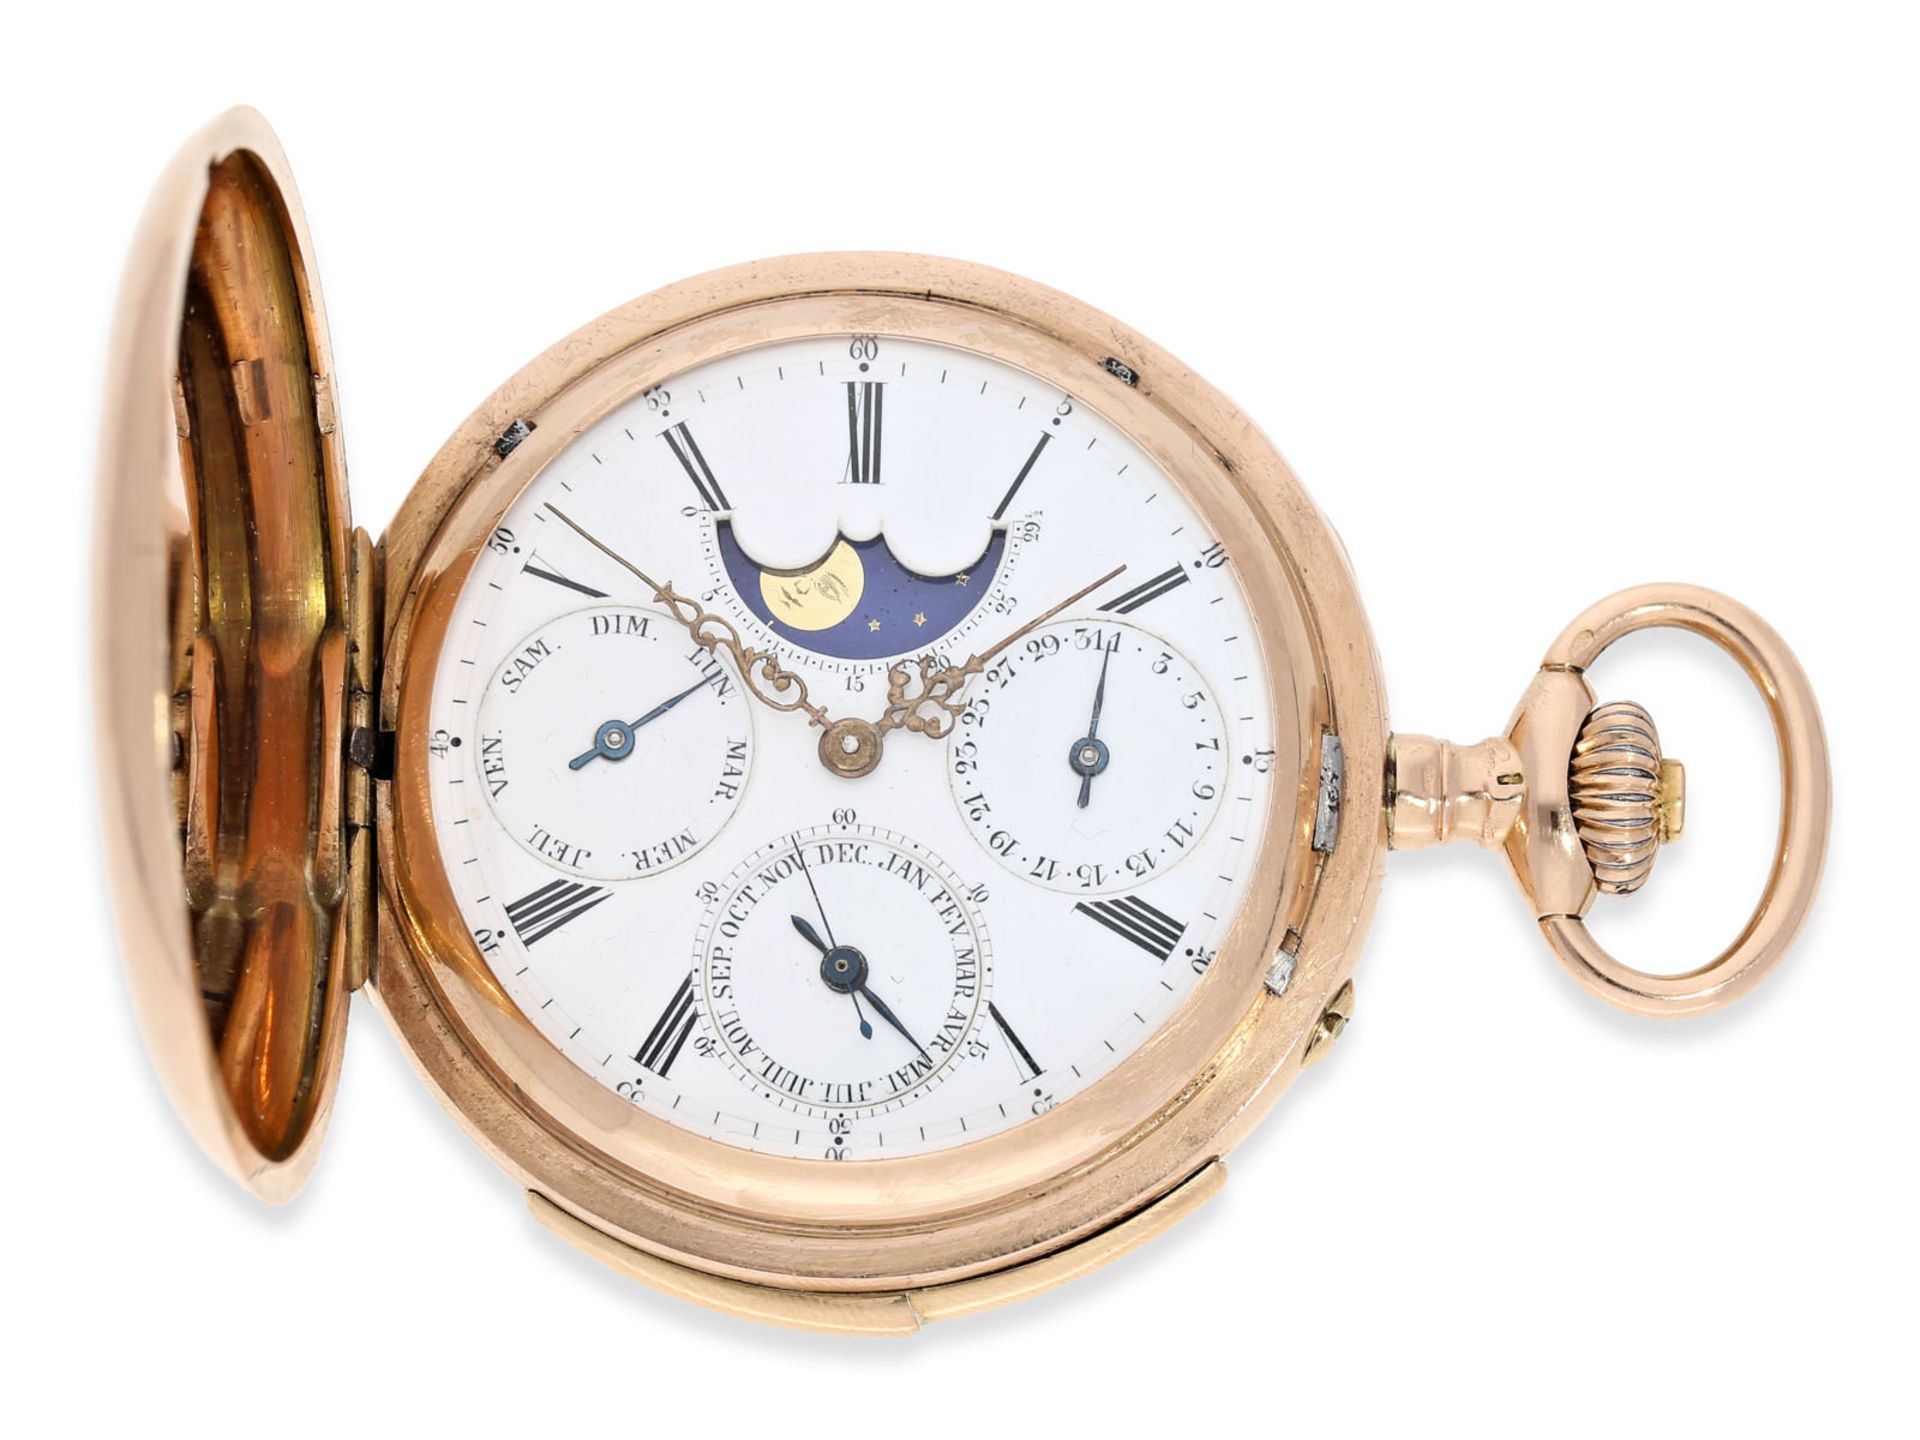 Pocket watch: rarity, very early pink gold hunting case watch with perpetual calendar and minute